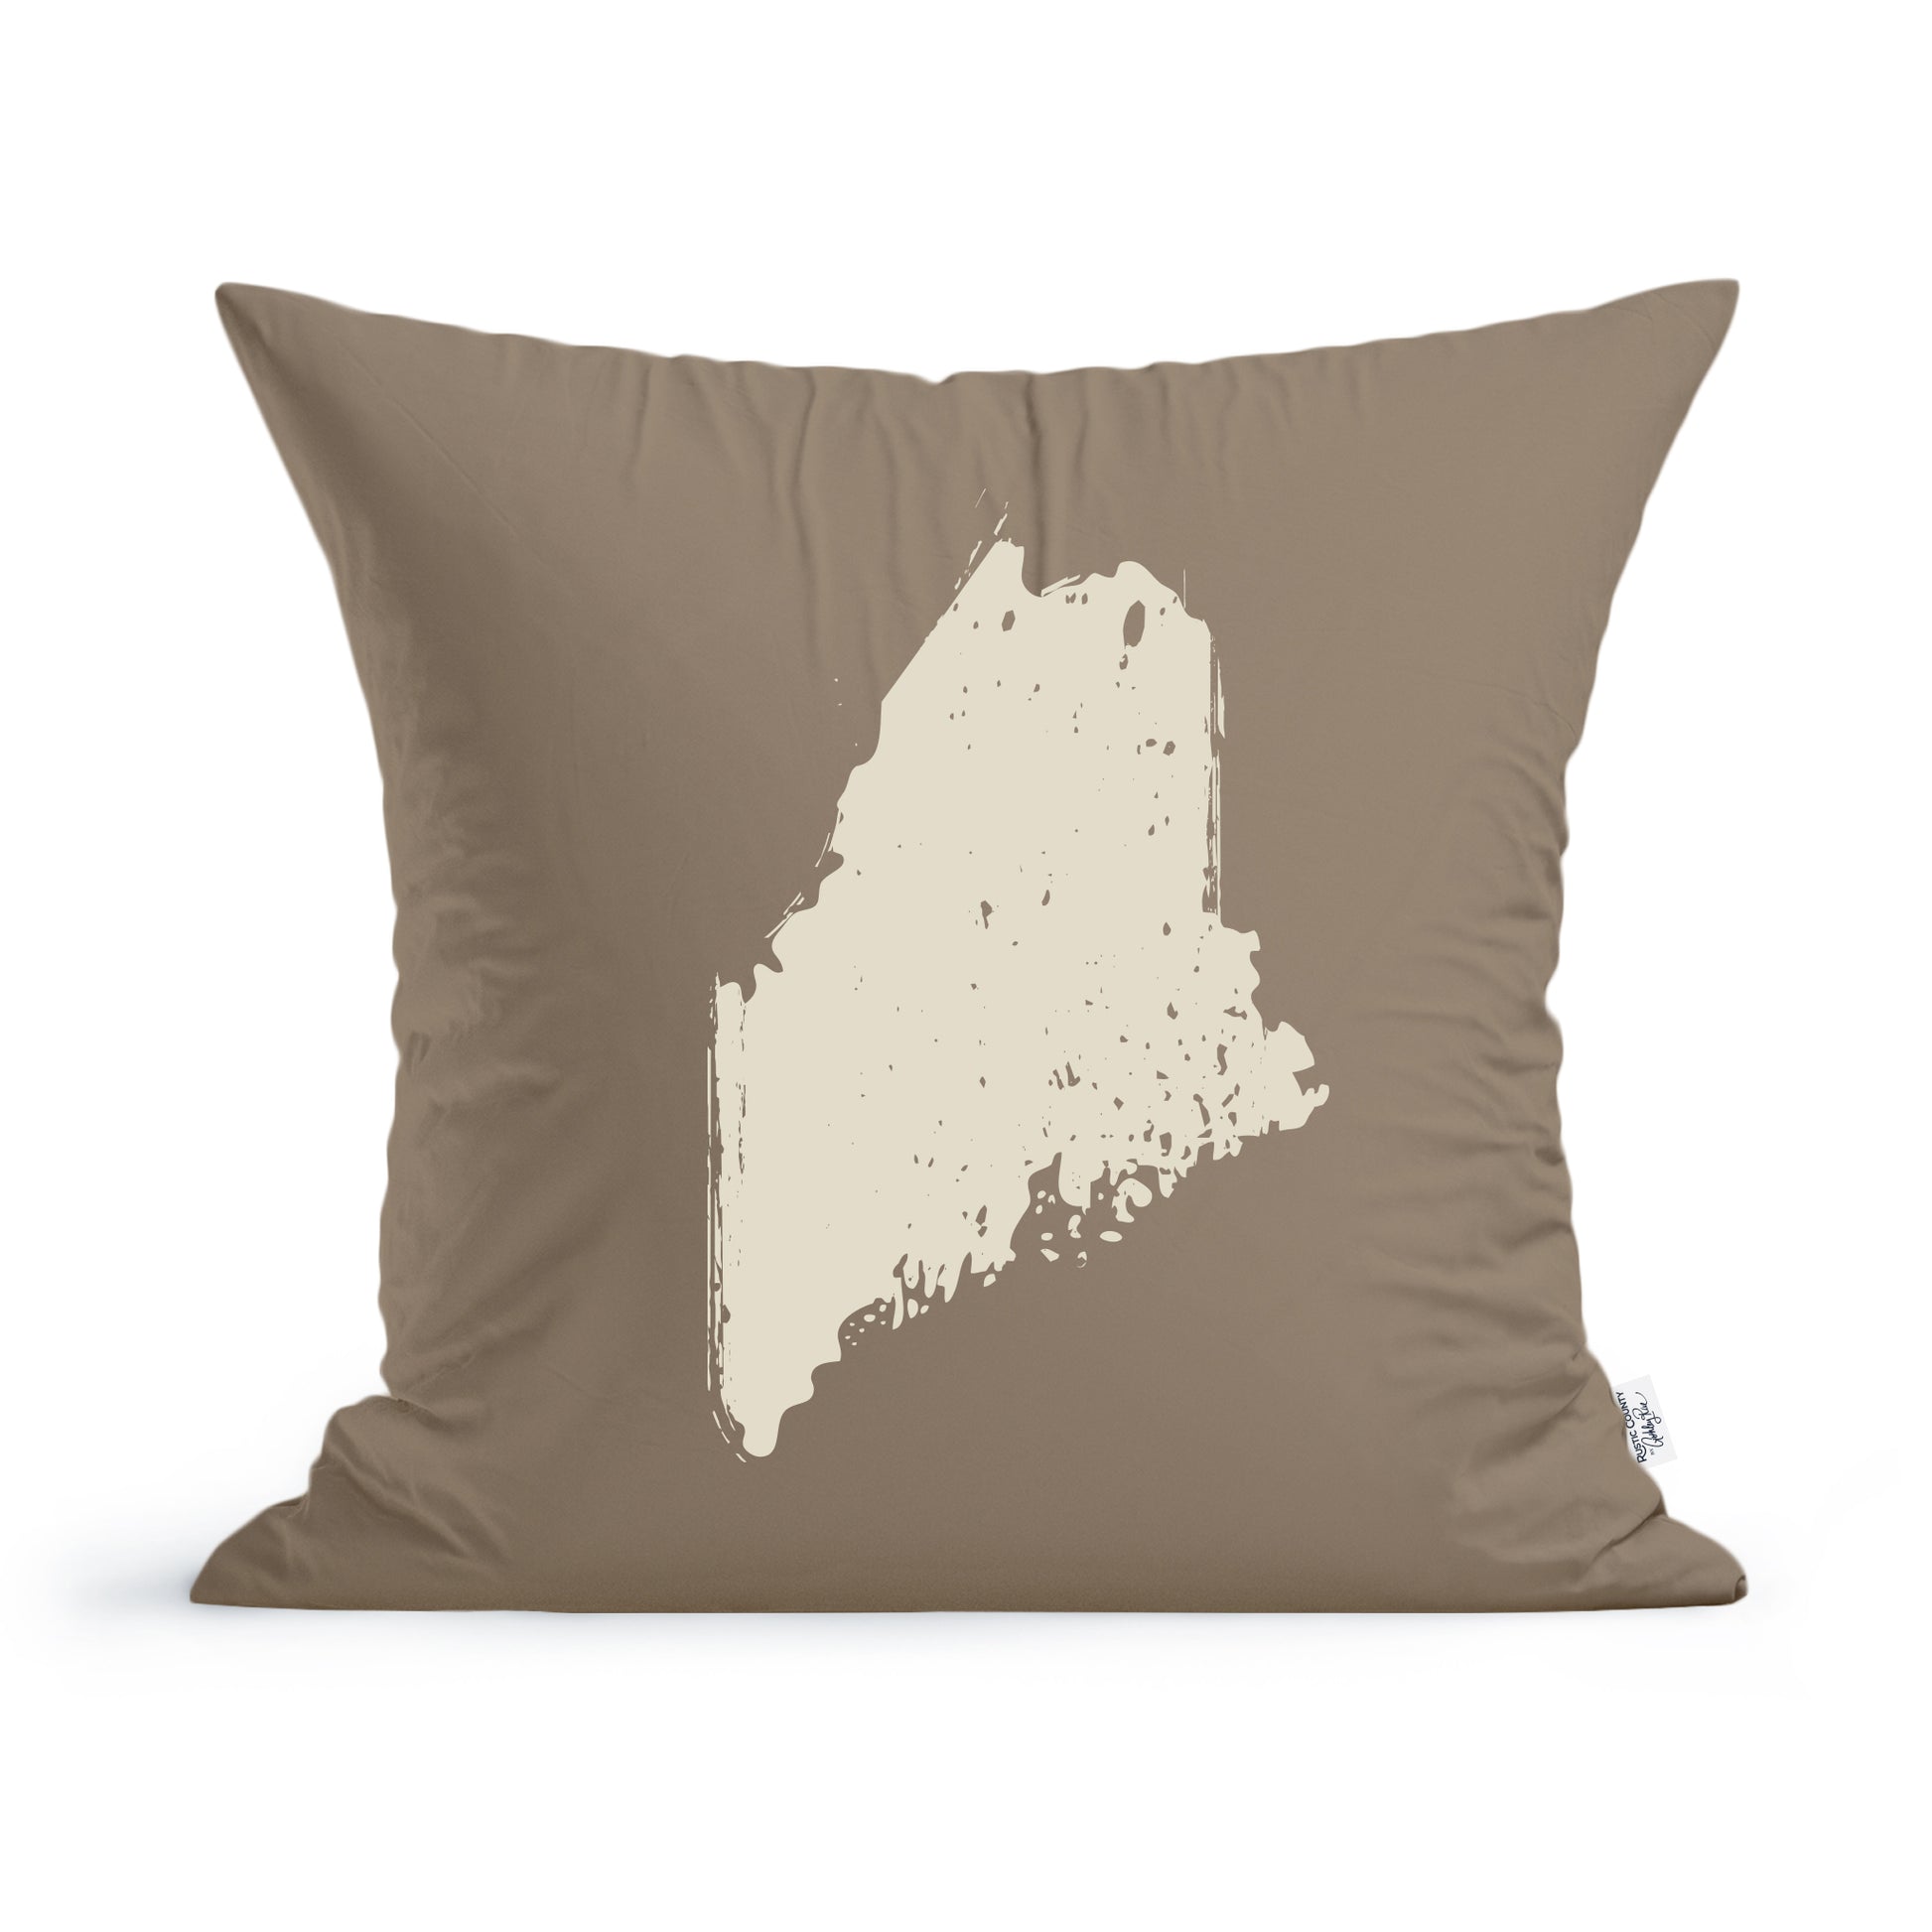 Rectangular brown State of Maine Pillow featuring a white abstract silhouette of Maine, centered on the front by Rustic County.